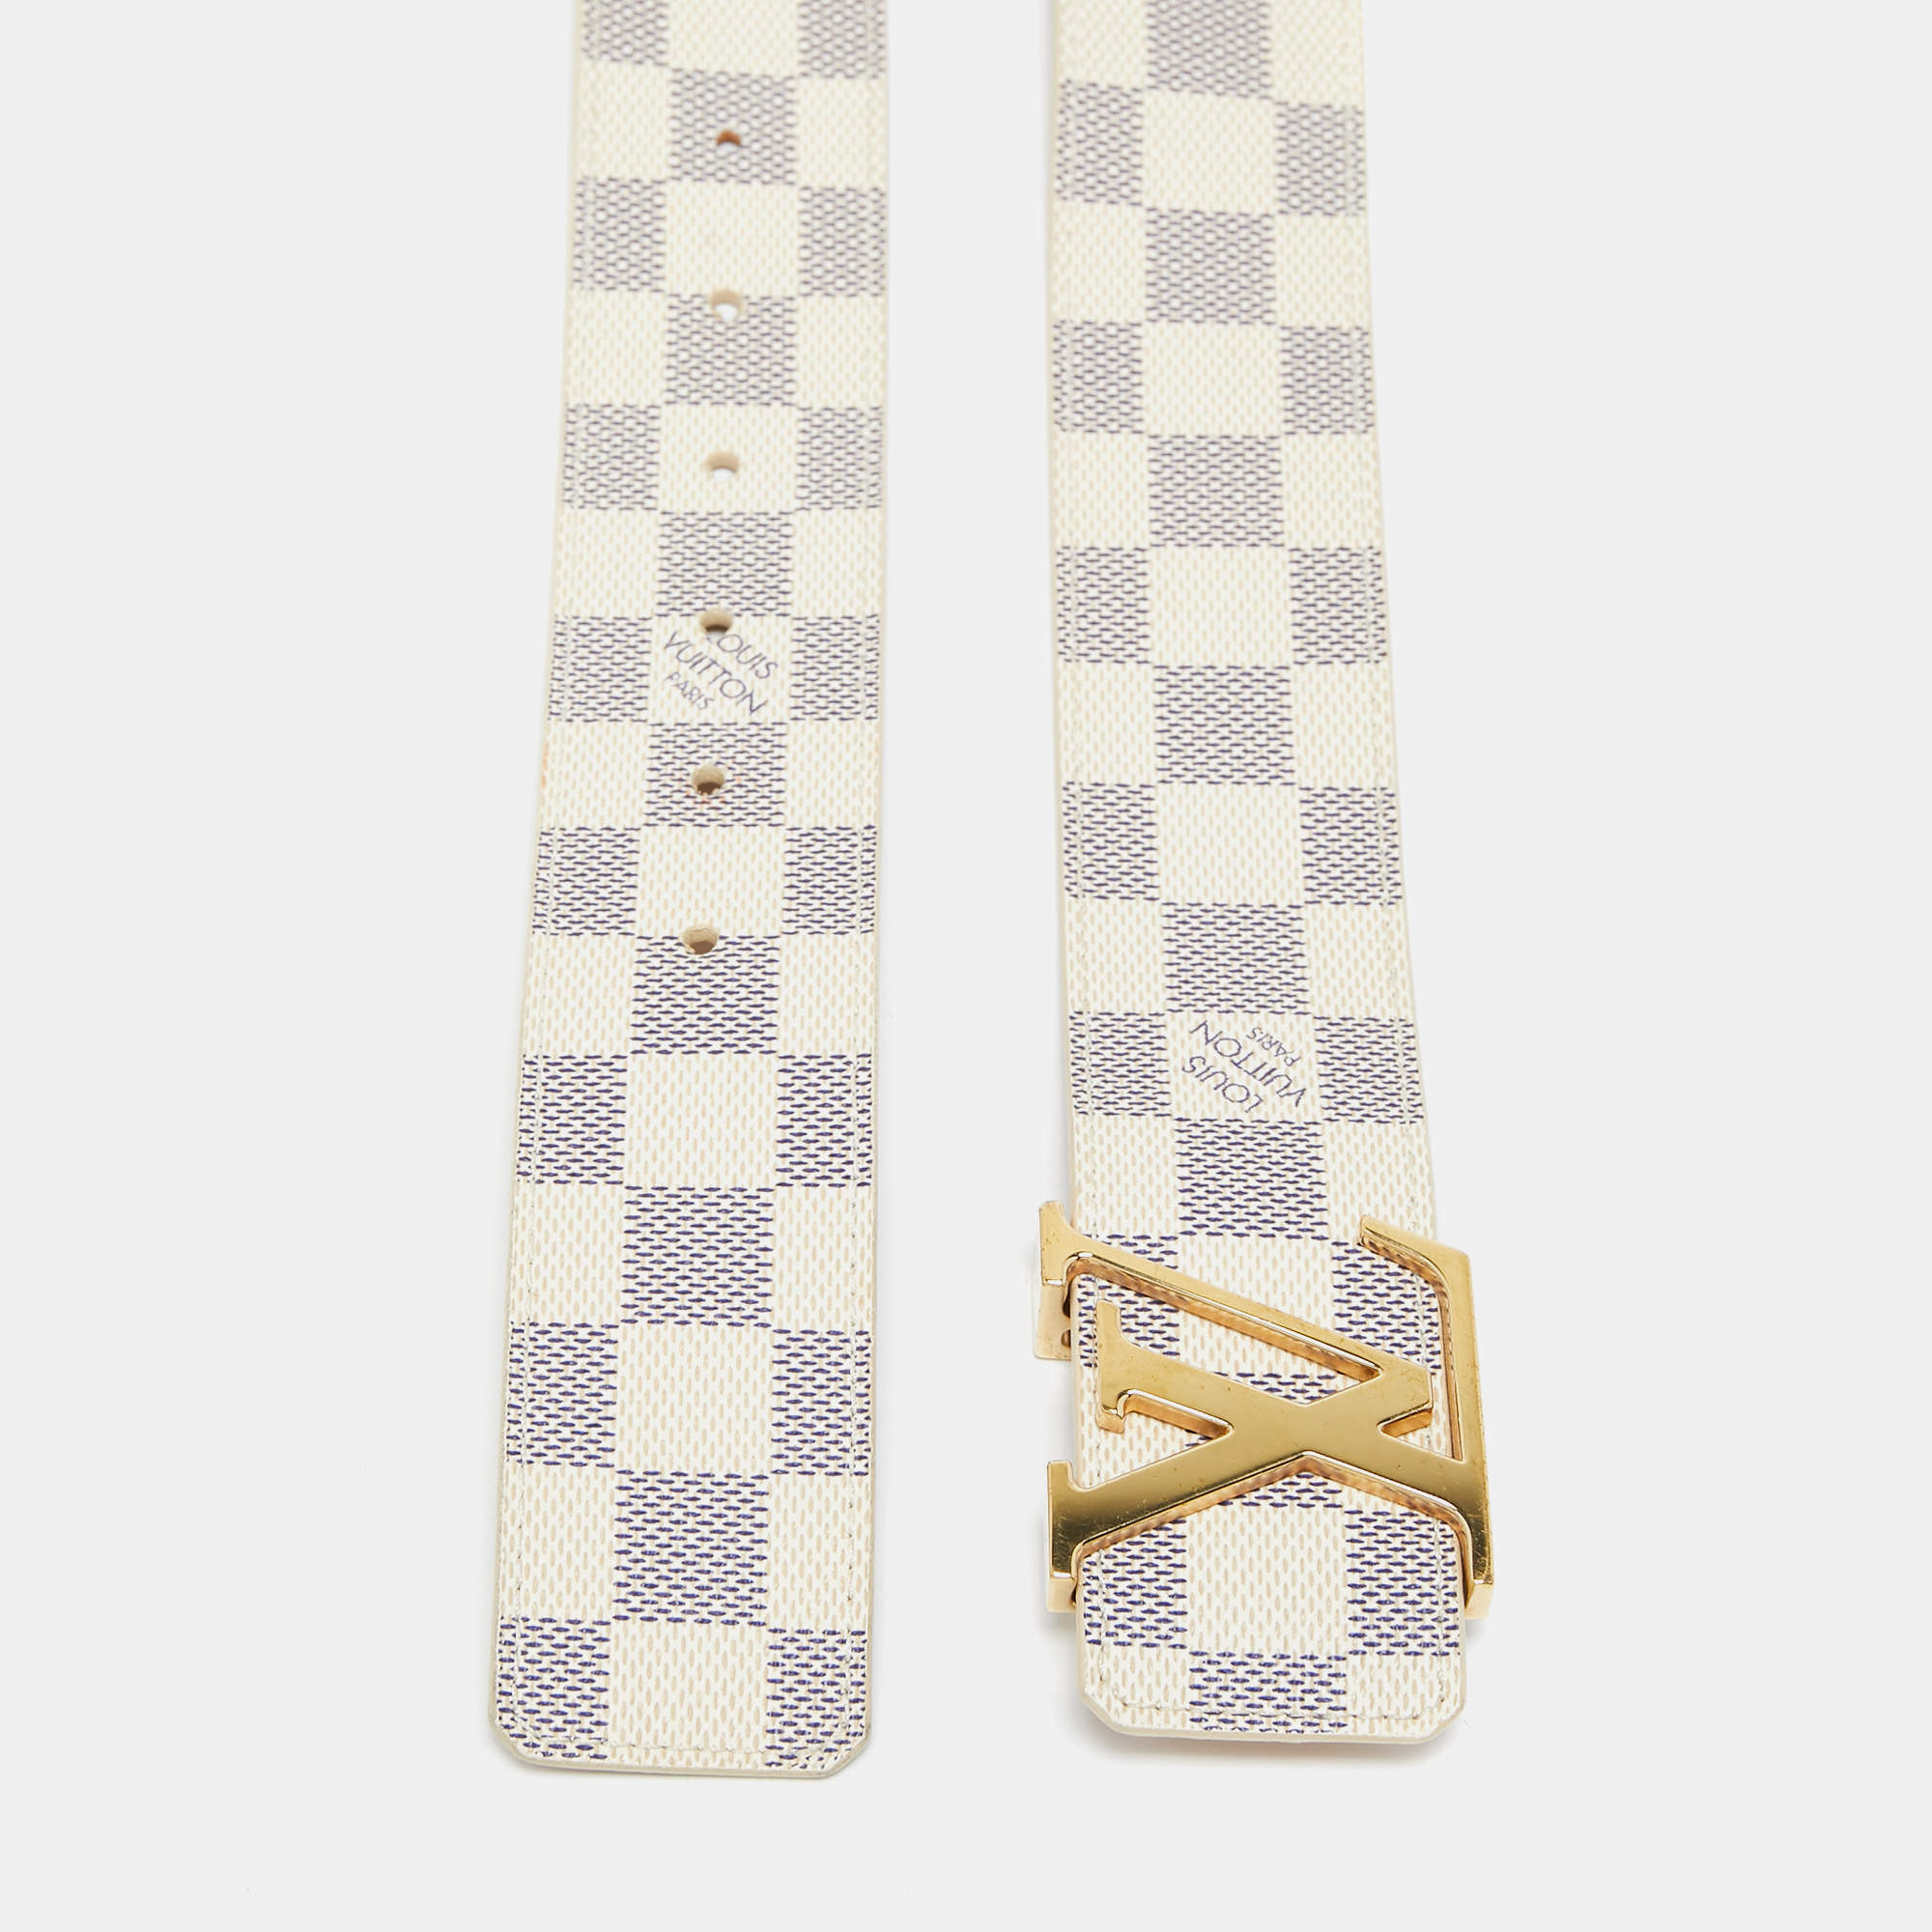 Louis Vuitton New Azur Belt Size 90 - 6/8 Dress 27 Pants White - $229 (54%  Off Retail) New With Tags - From Al